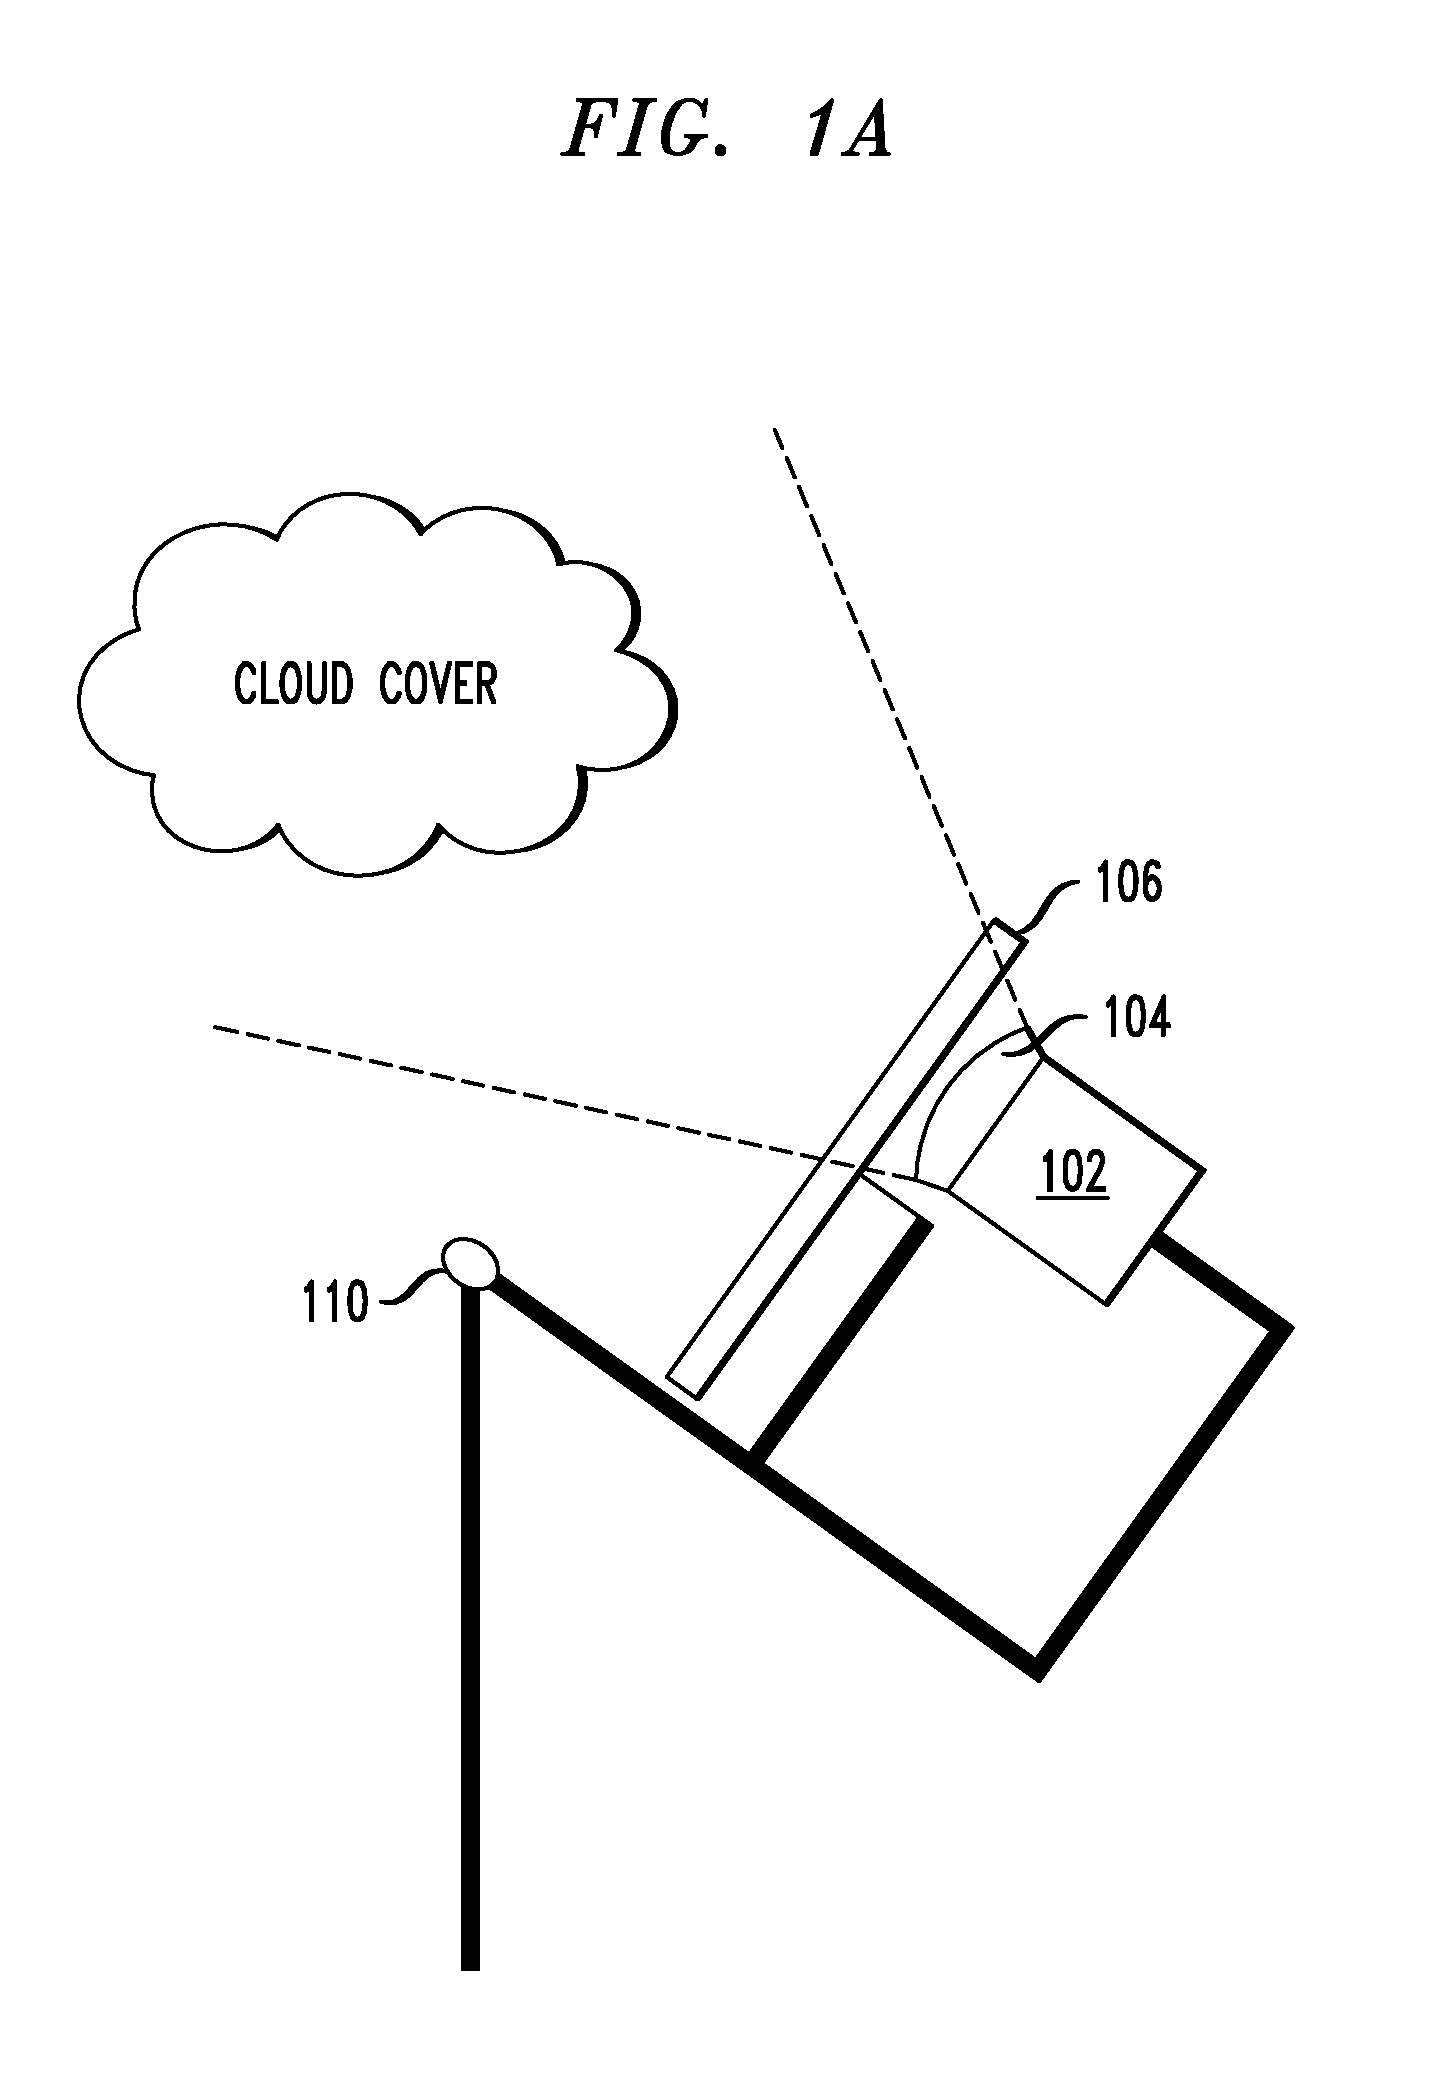 Large-Area Monitoring Using Infrared Imaging System